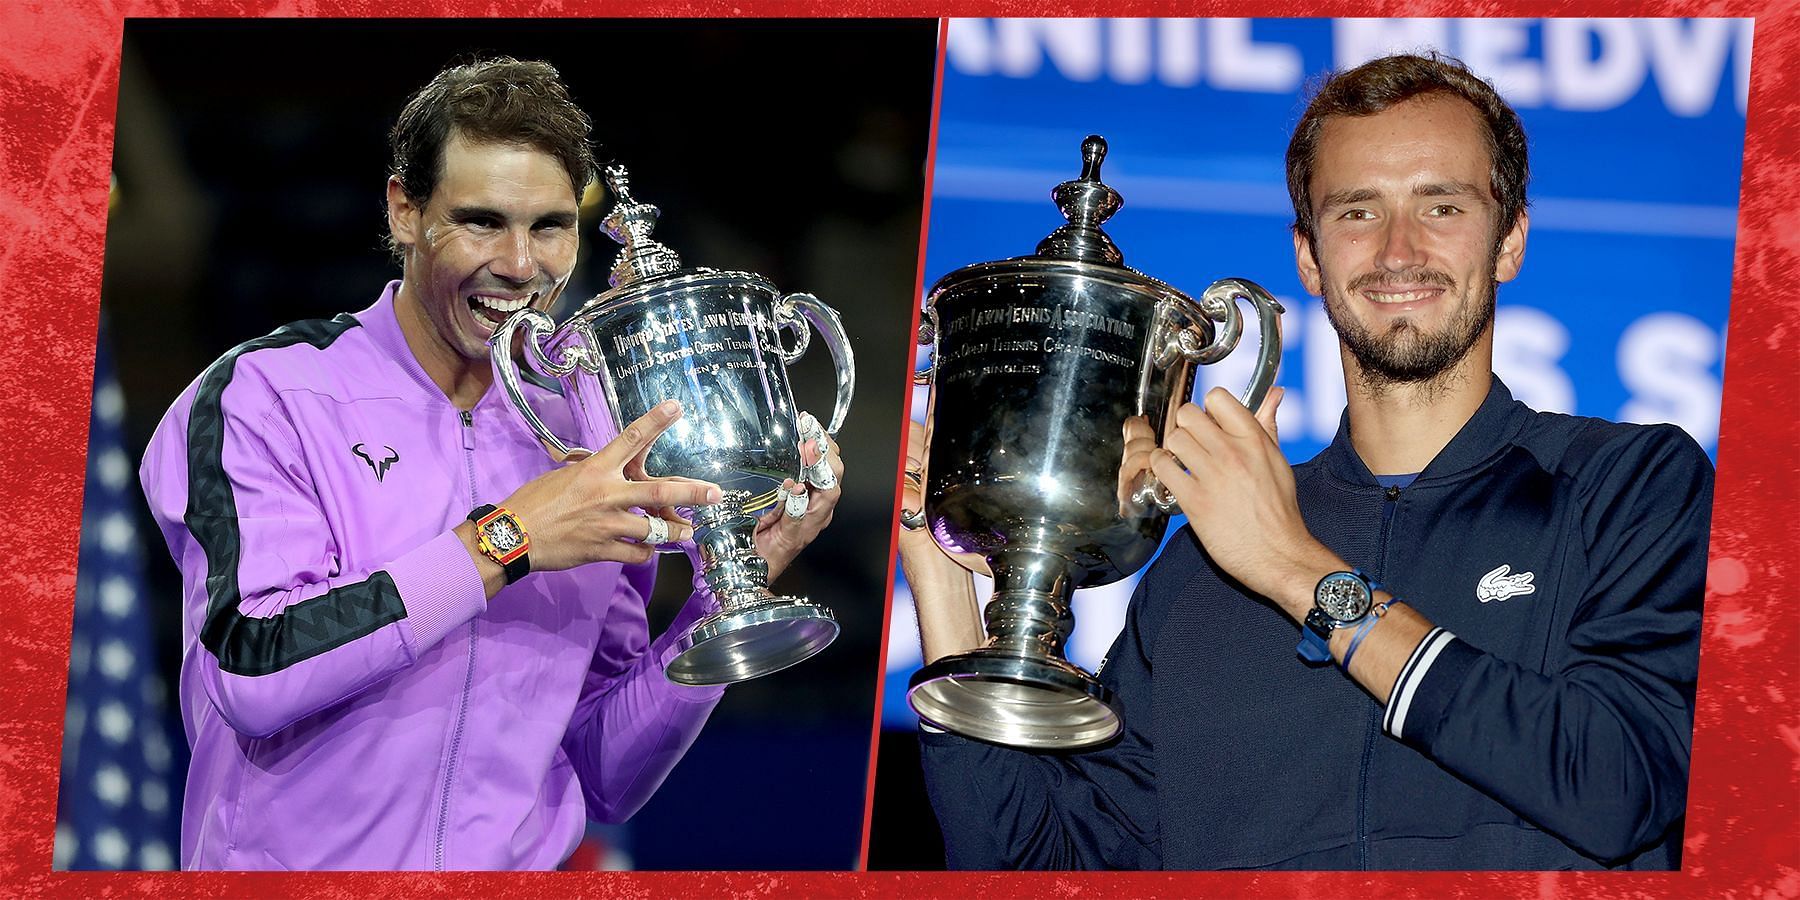 Rafael Nadal and Daniil Medvedev are some of the favorites for the US Open title.